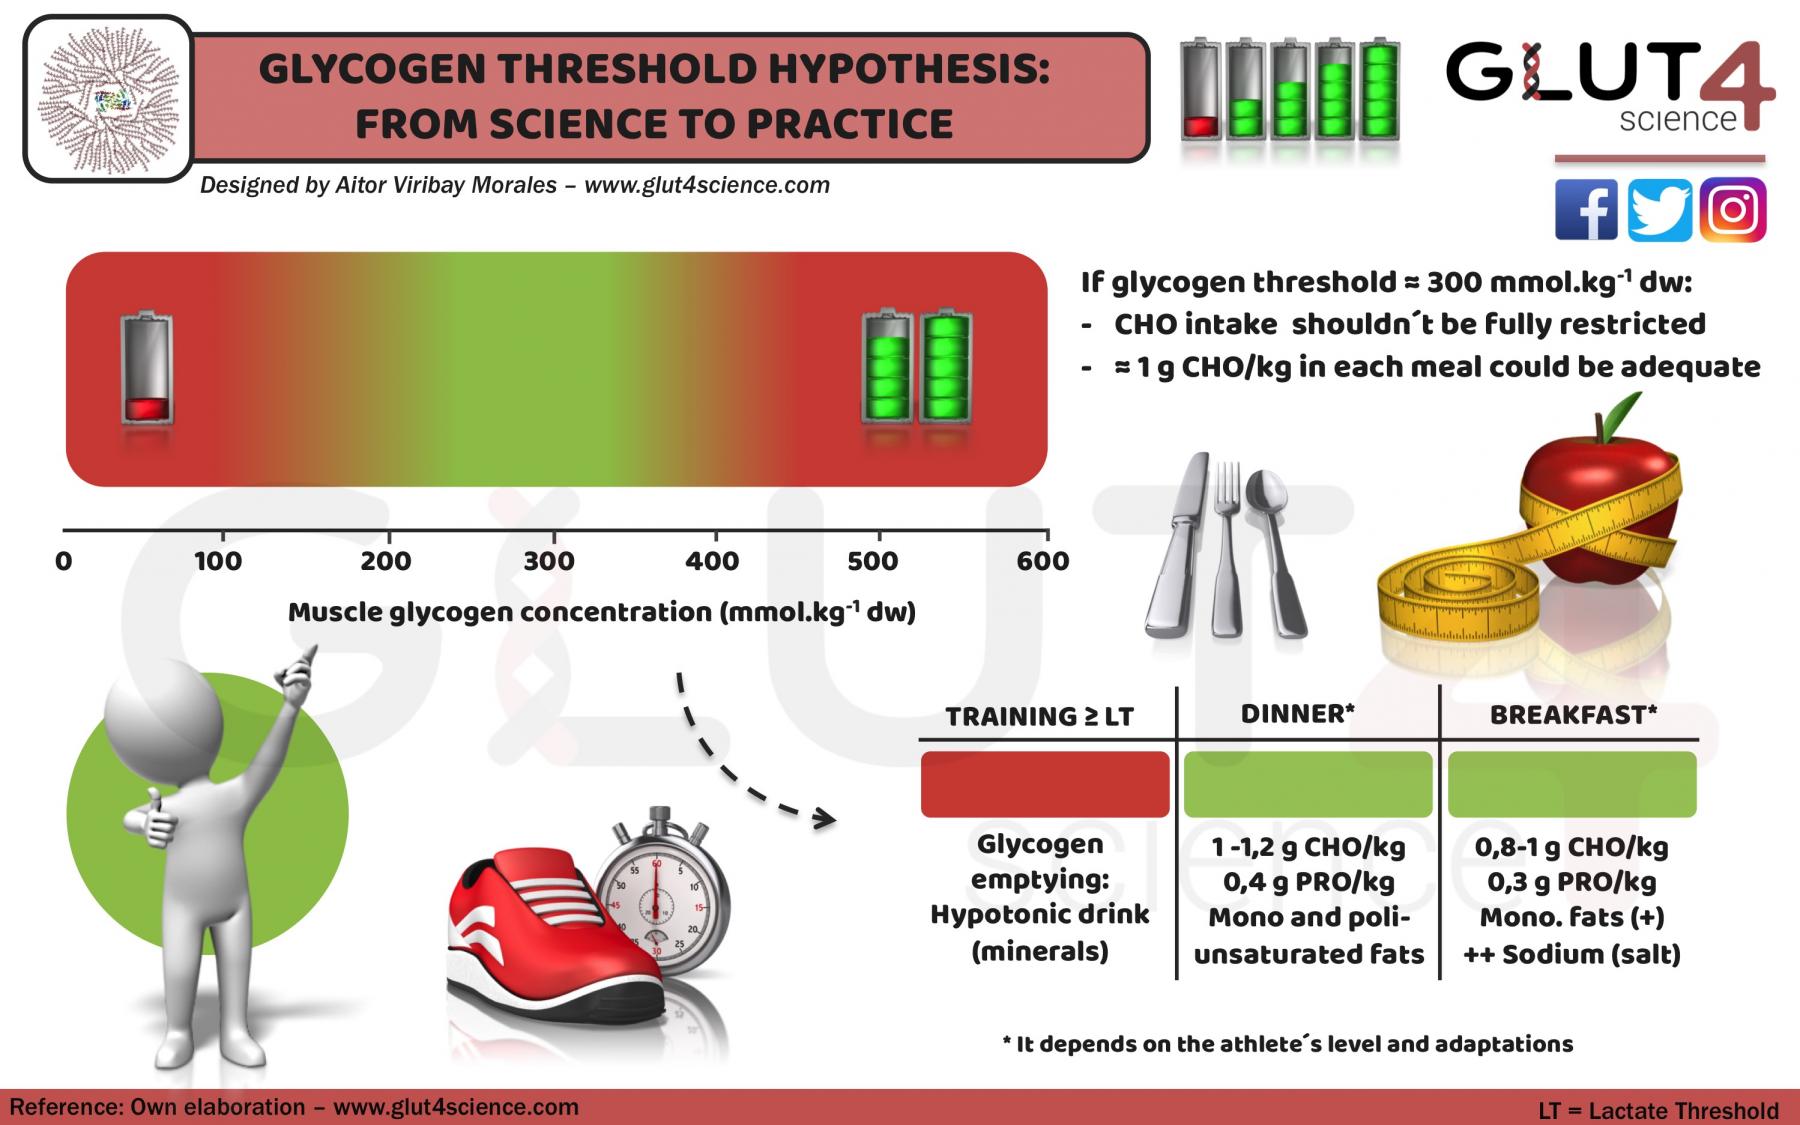 Glycogen Threshold: From science to practice